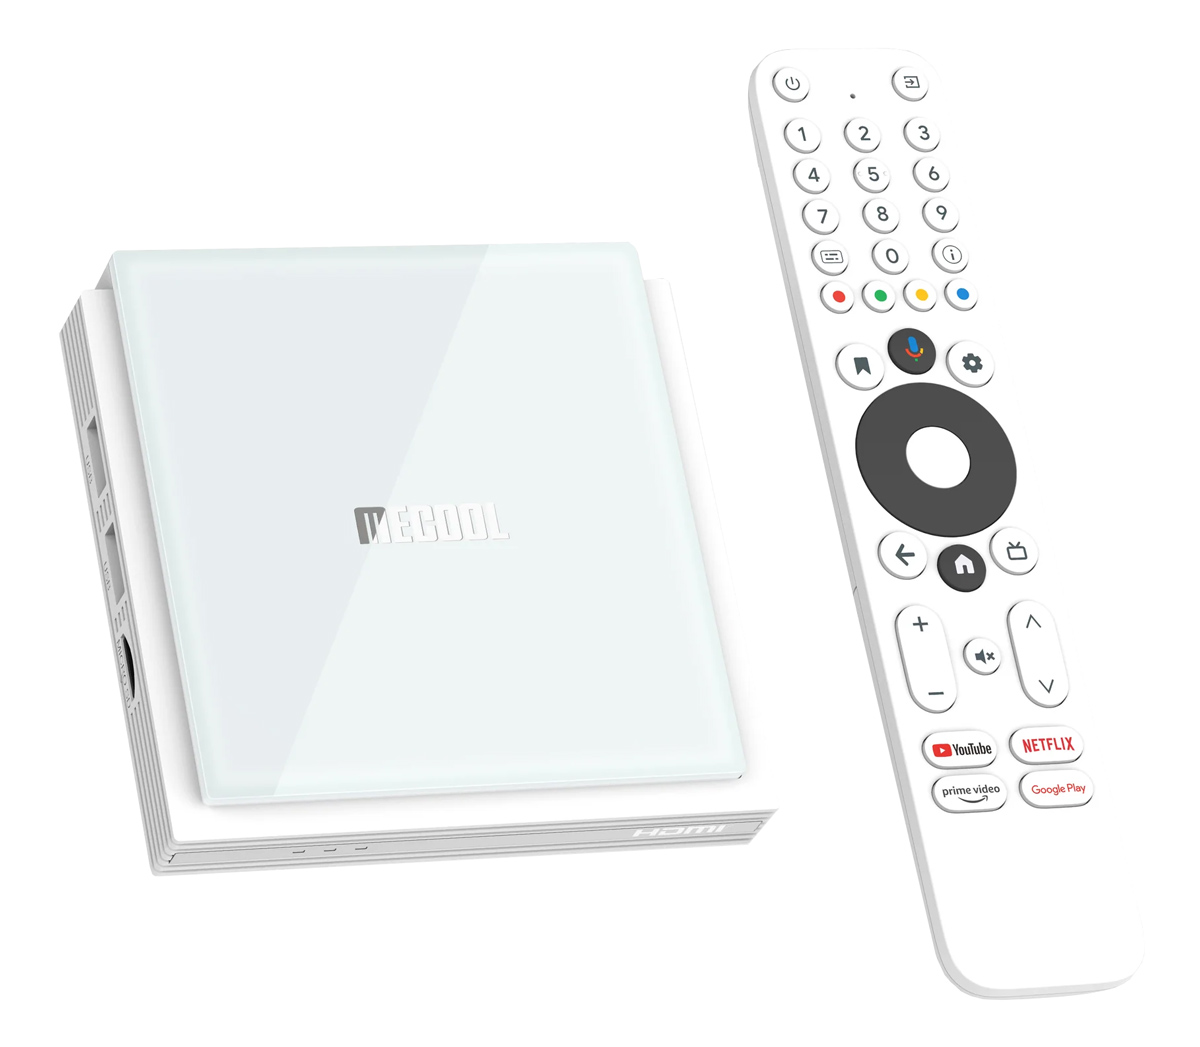 MECOOL TV Box KM2 Plus Deluxe, Google πιστοποίηση, 4K, WiFi, Android 11 - MECOOL 114457